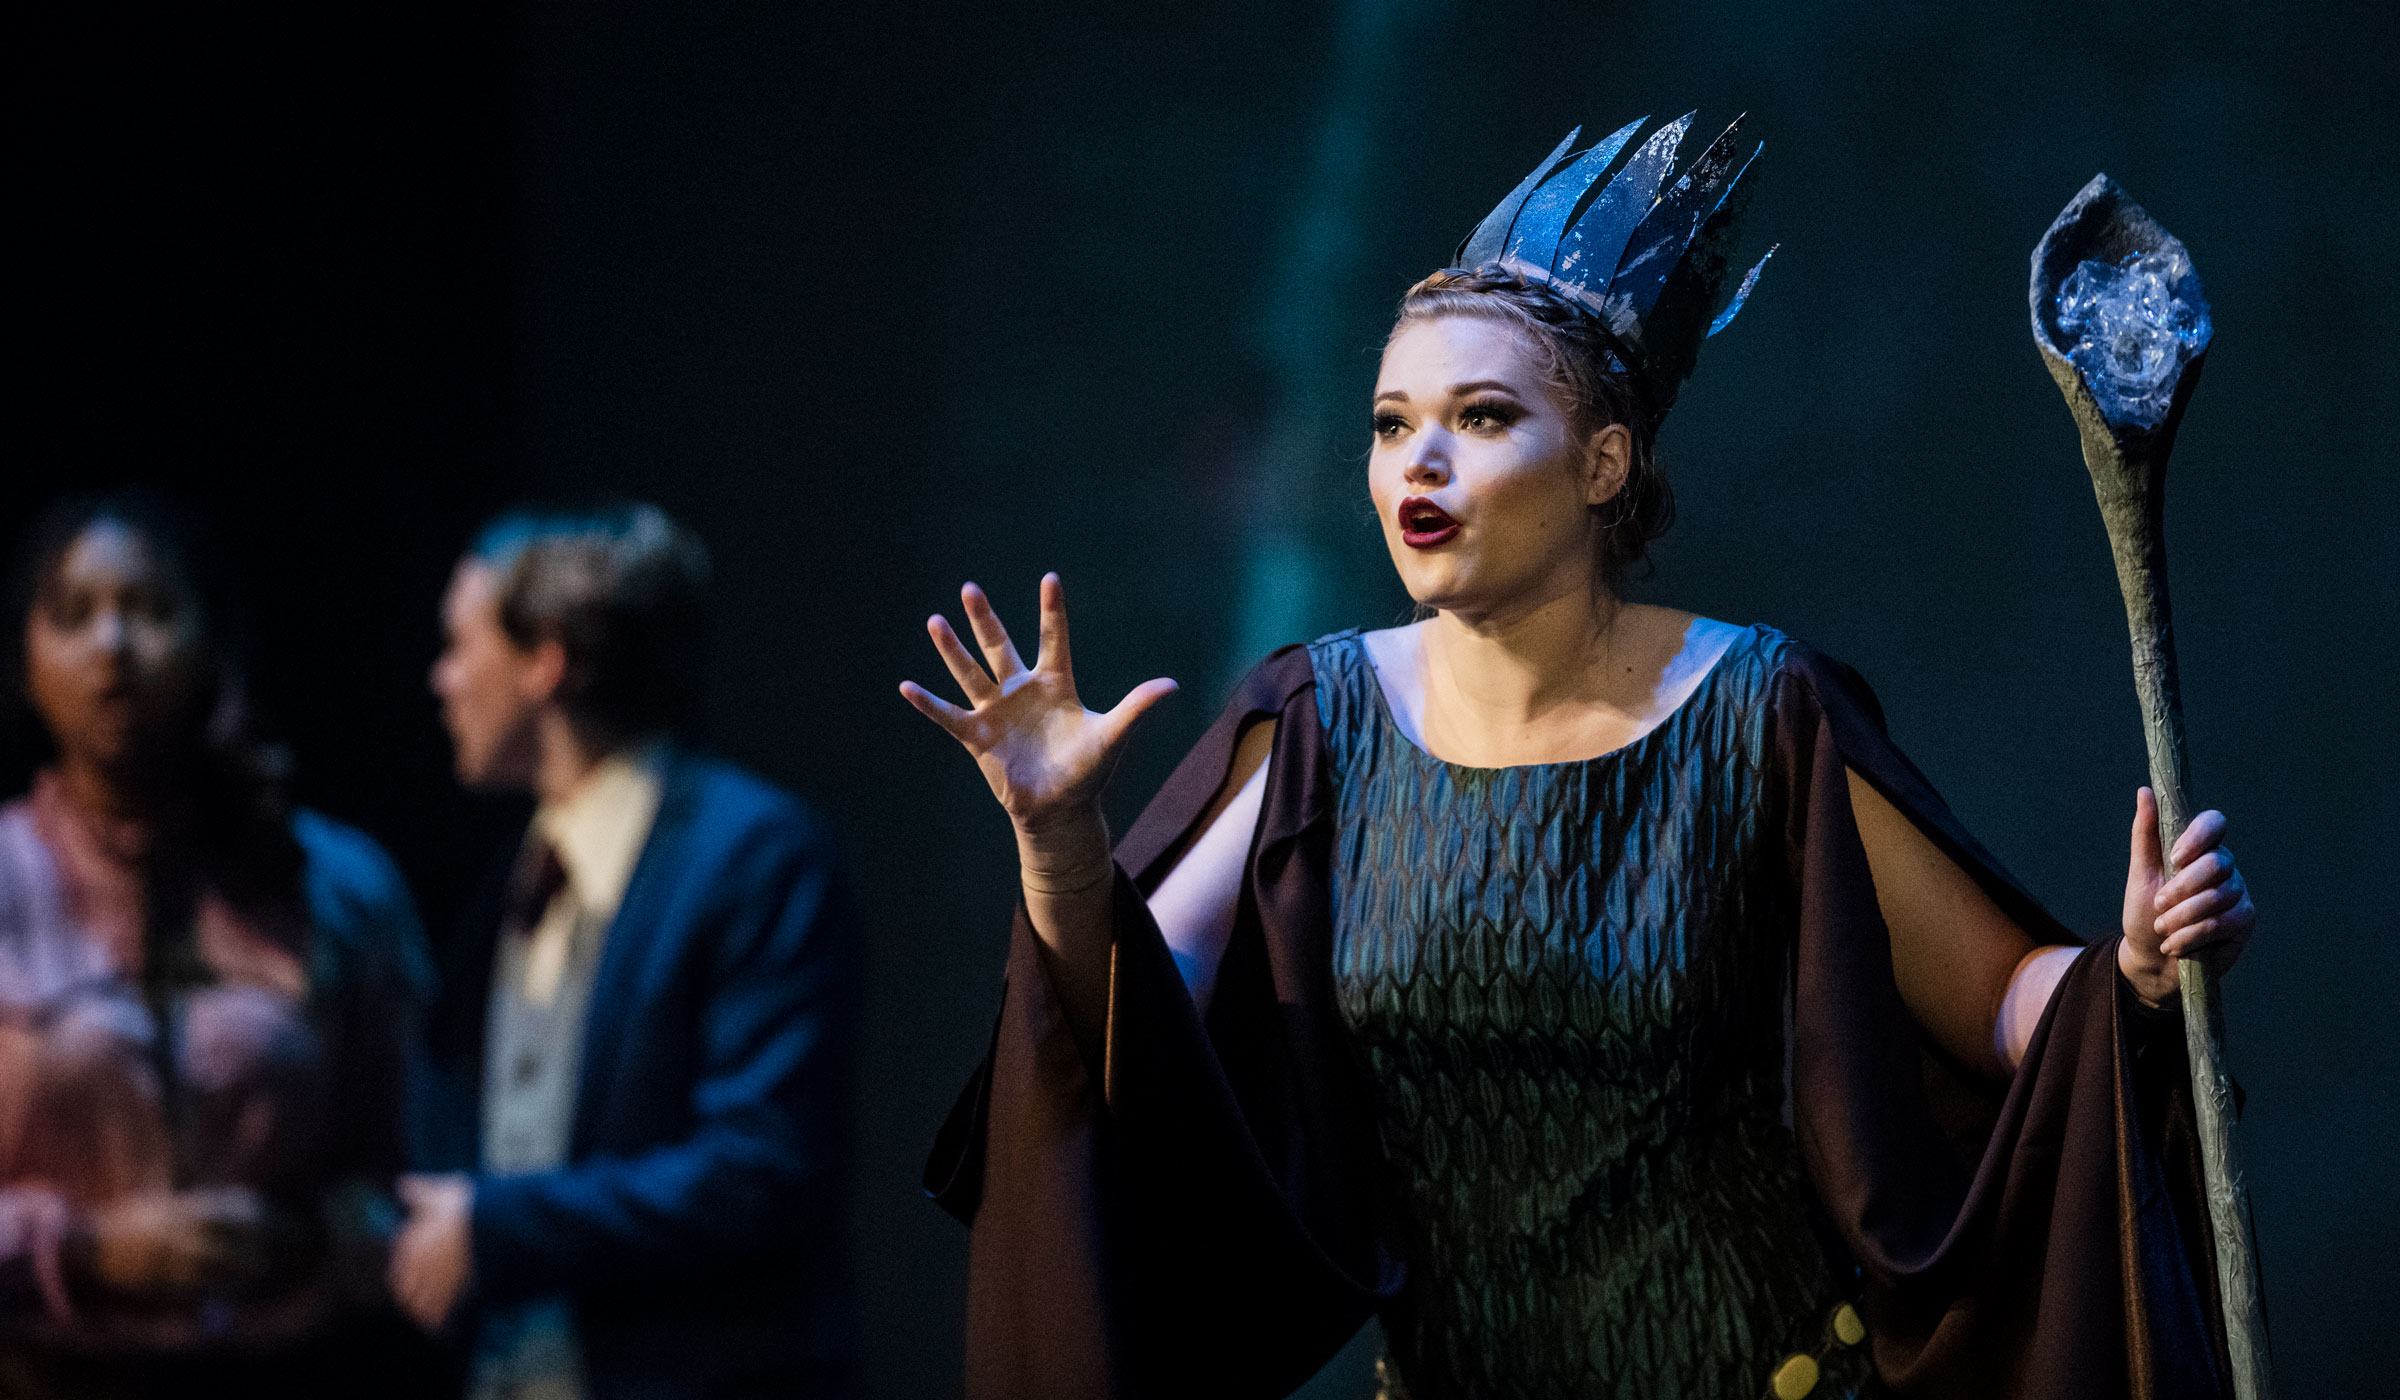 Sophomore special education major, Ashley Anderson stars in the new TheatreMSU production The Magician&#039;s Nephew as Queen Jadis.